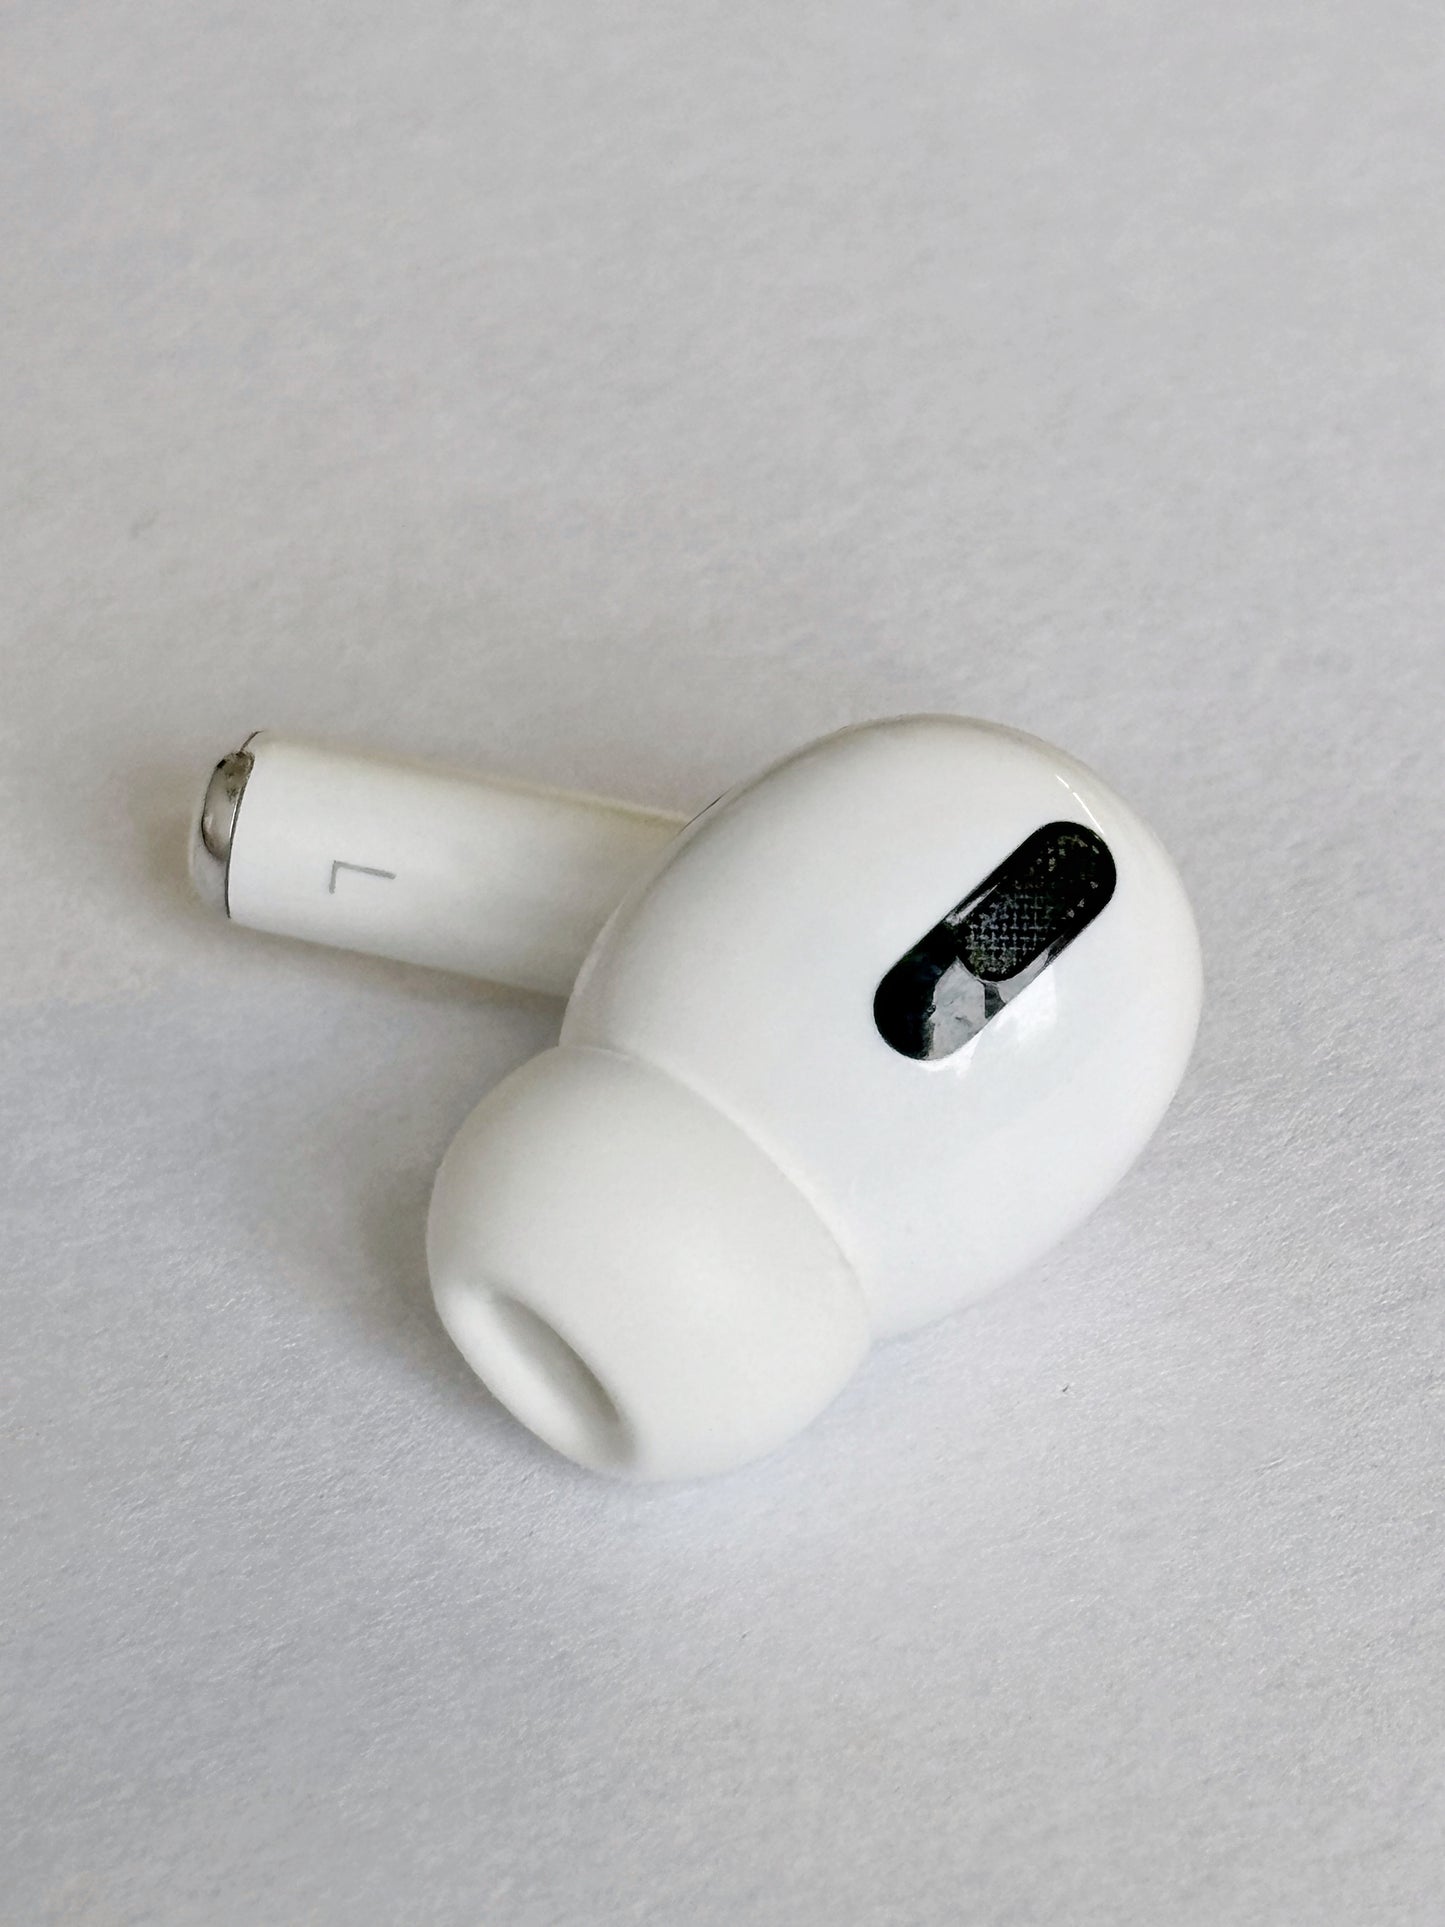 Apple AirPods Pro 1. Generation A2084 links Refurbished